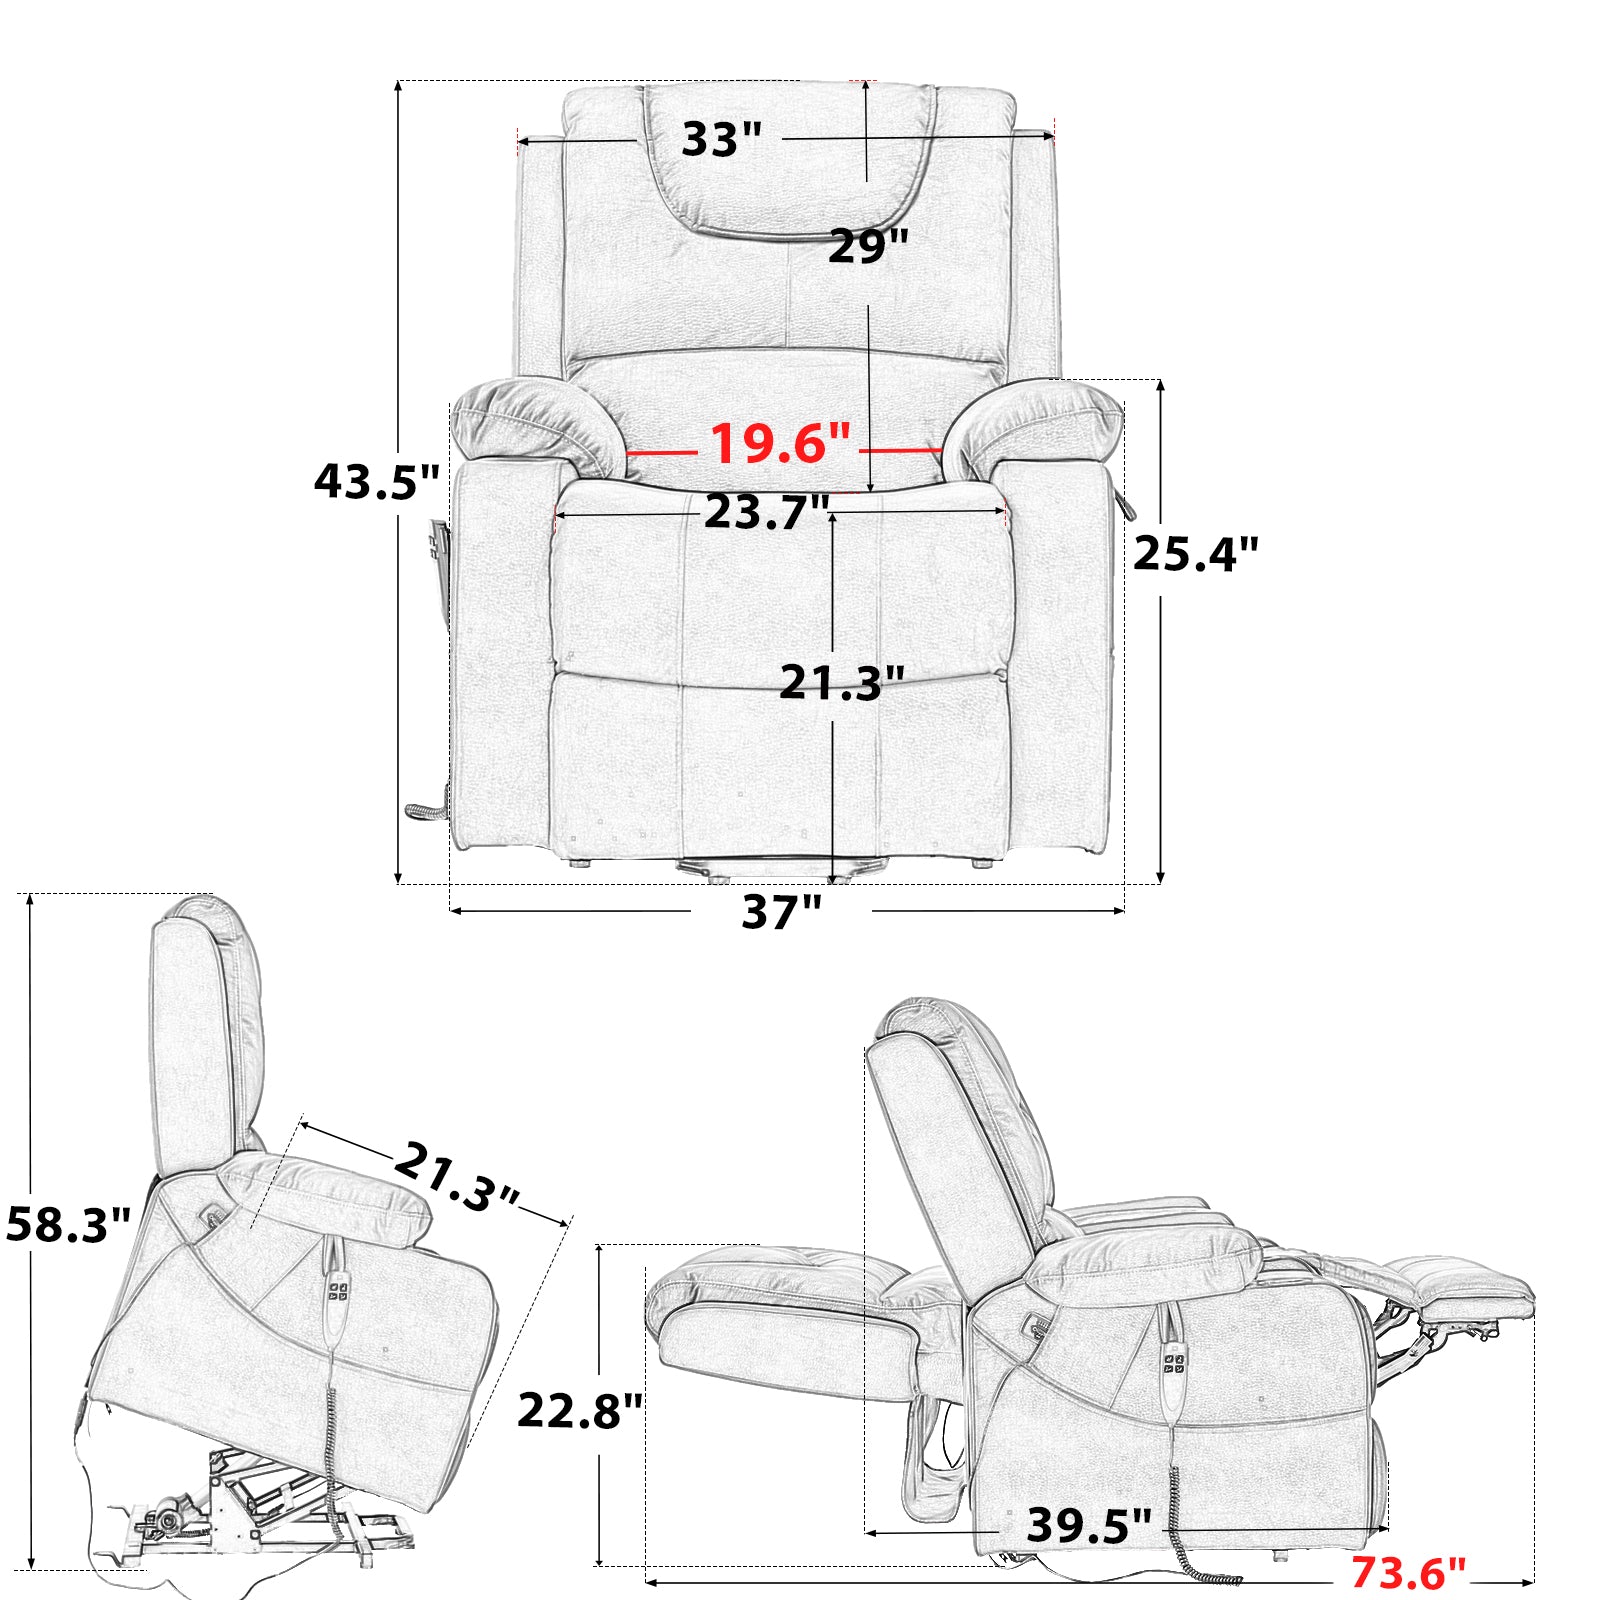 9196 Weights & Dimensions